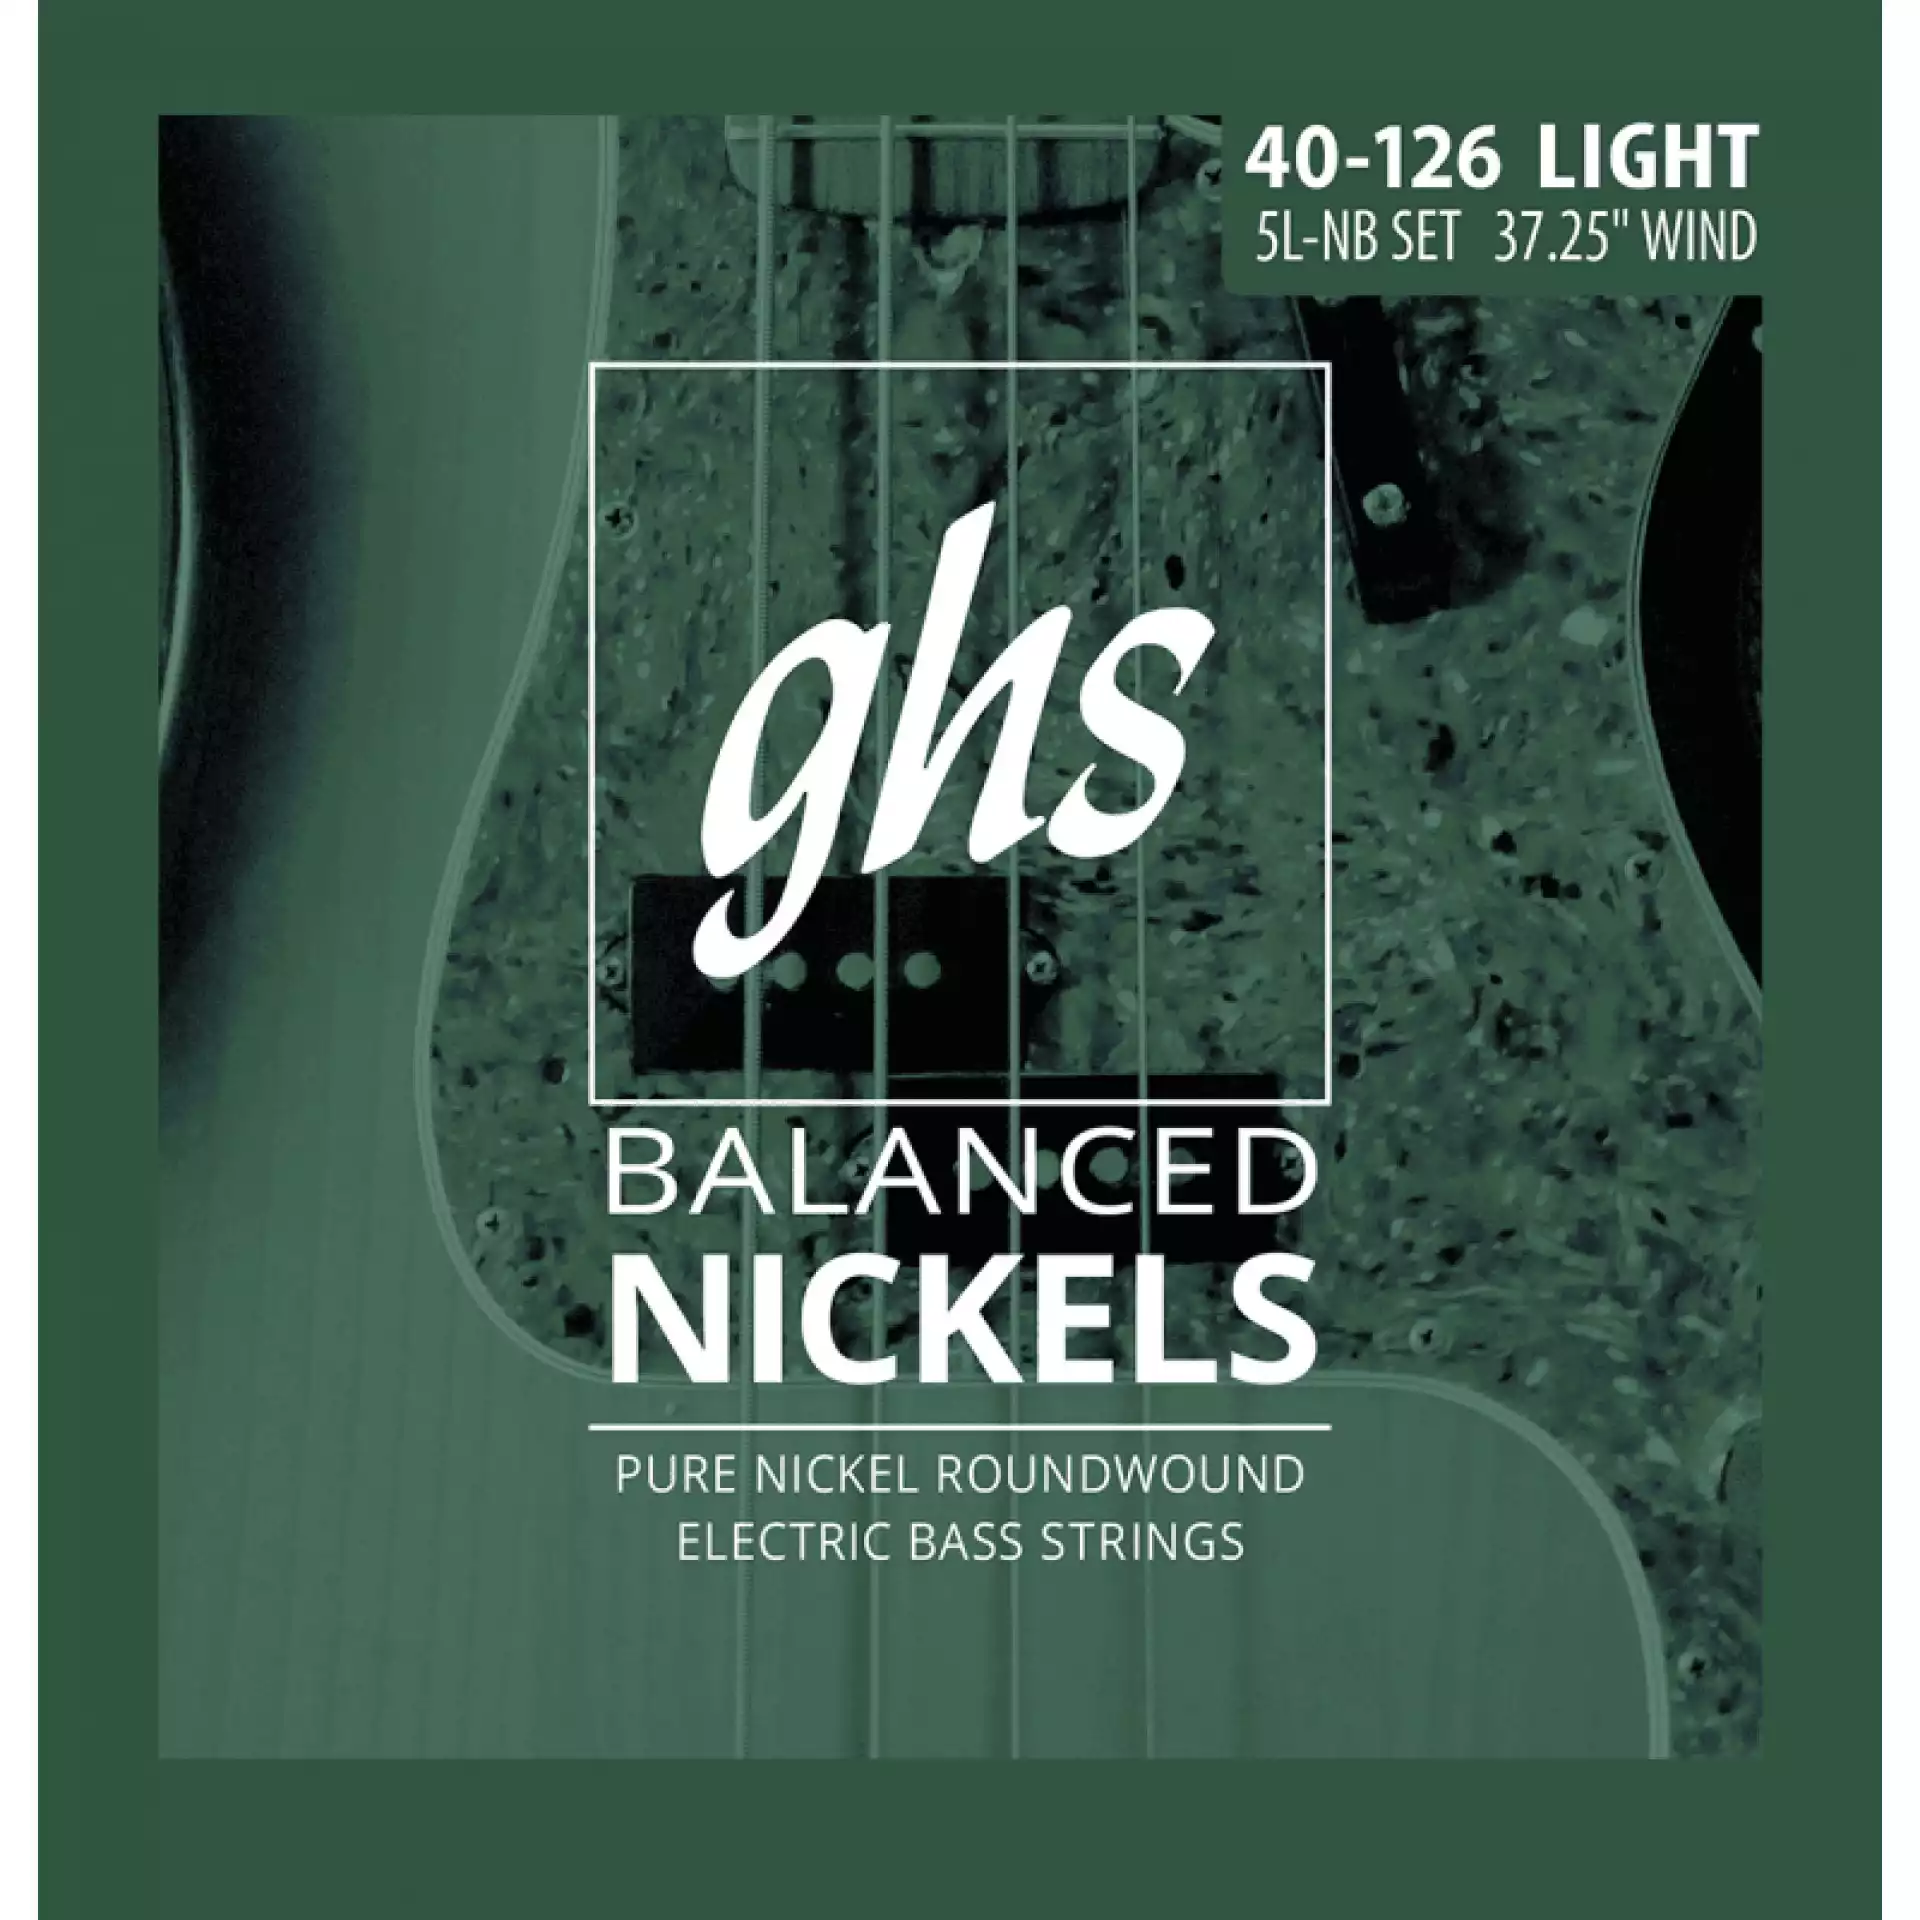 GHS 5L-NB Balanced Nickels Pure Nickel Round Wound Bass Strings Long Scale - 5-String 40-126